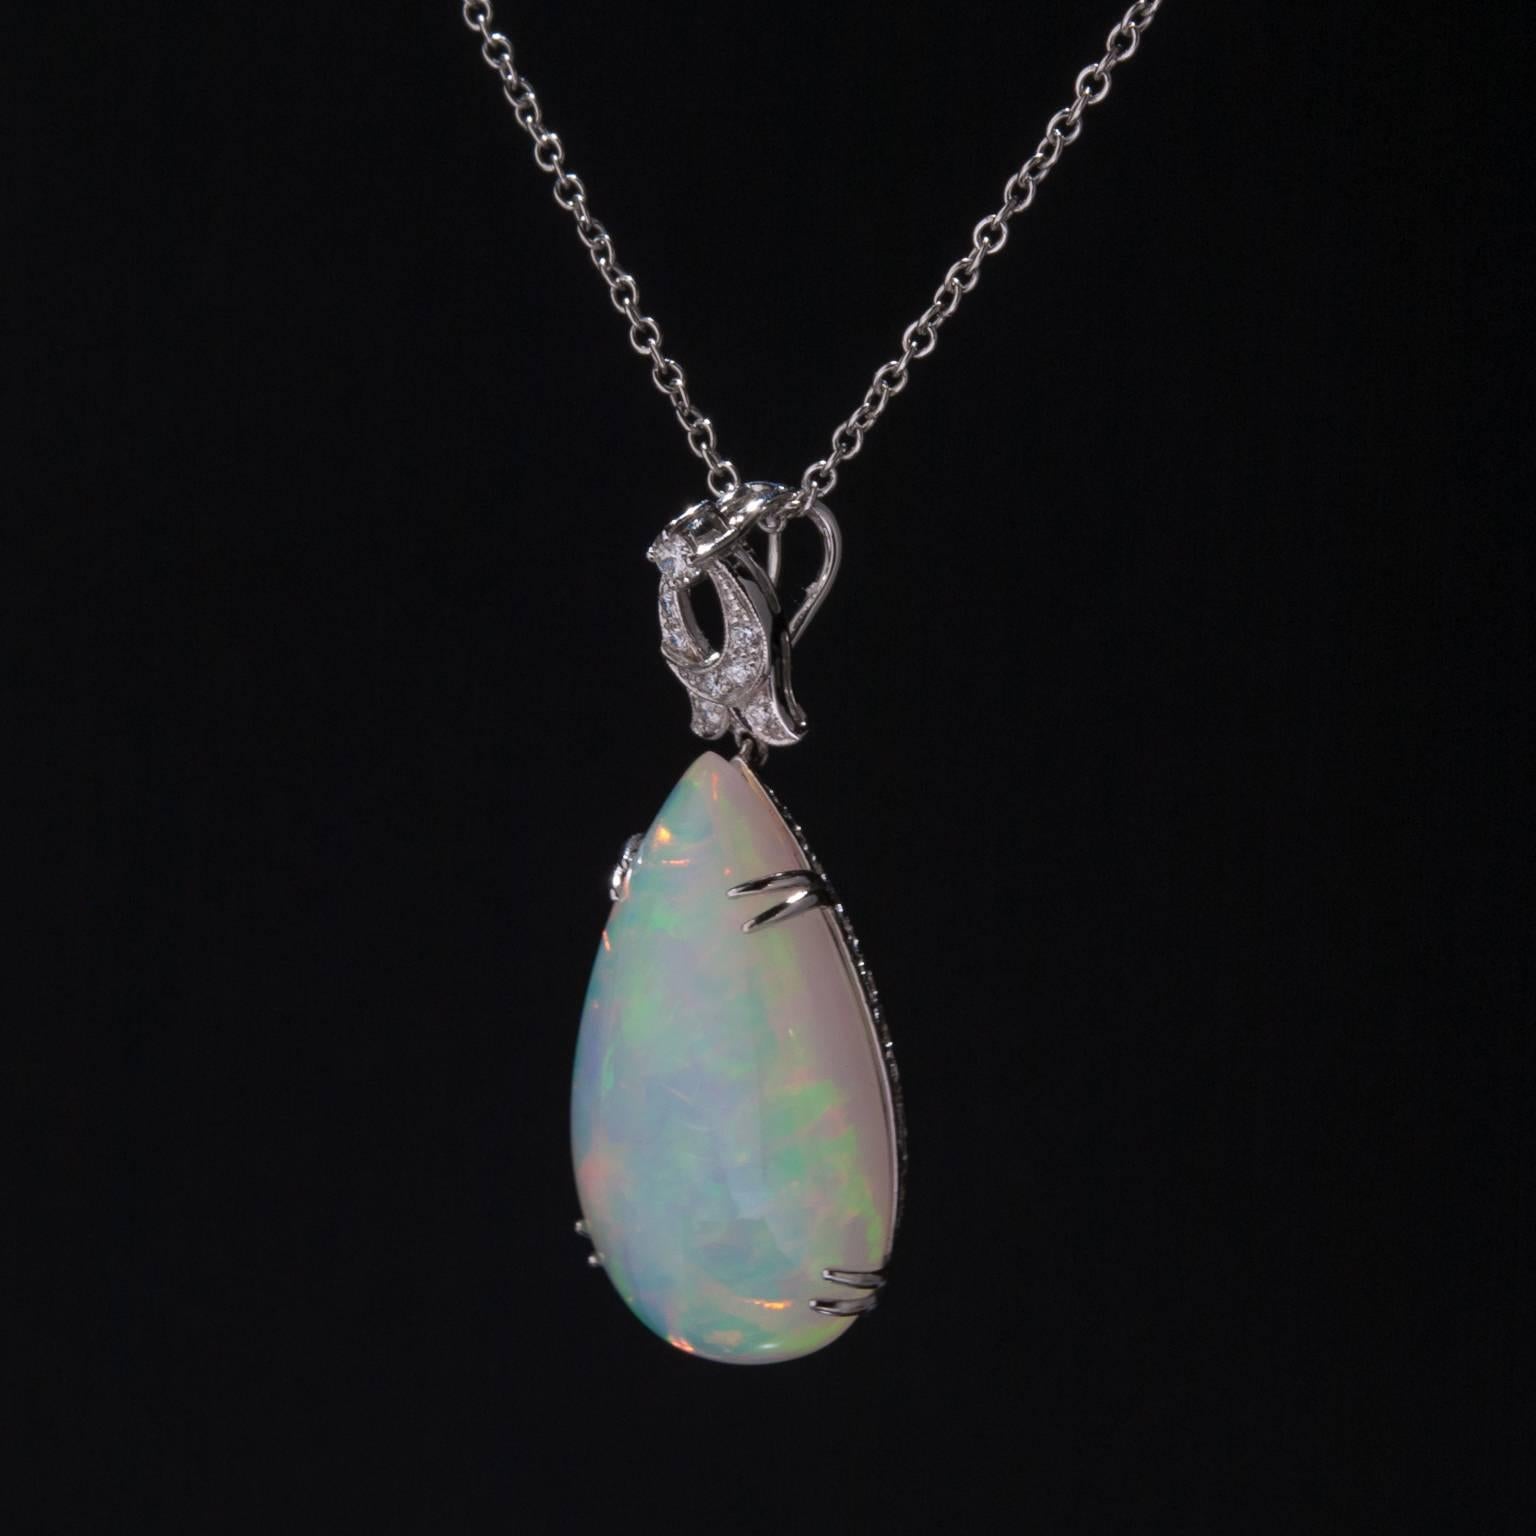 A stunning 21.38 carat Ethiopian Opal pendant with .19 total carats of accent diamonds. This substantial pear-shaped opal measures 30mm by 19mm and is set in 14k white gold.

Chain not included.